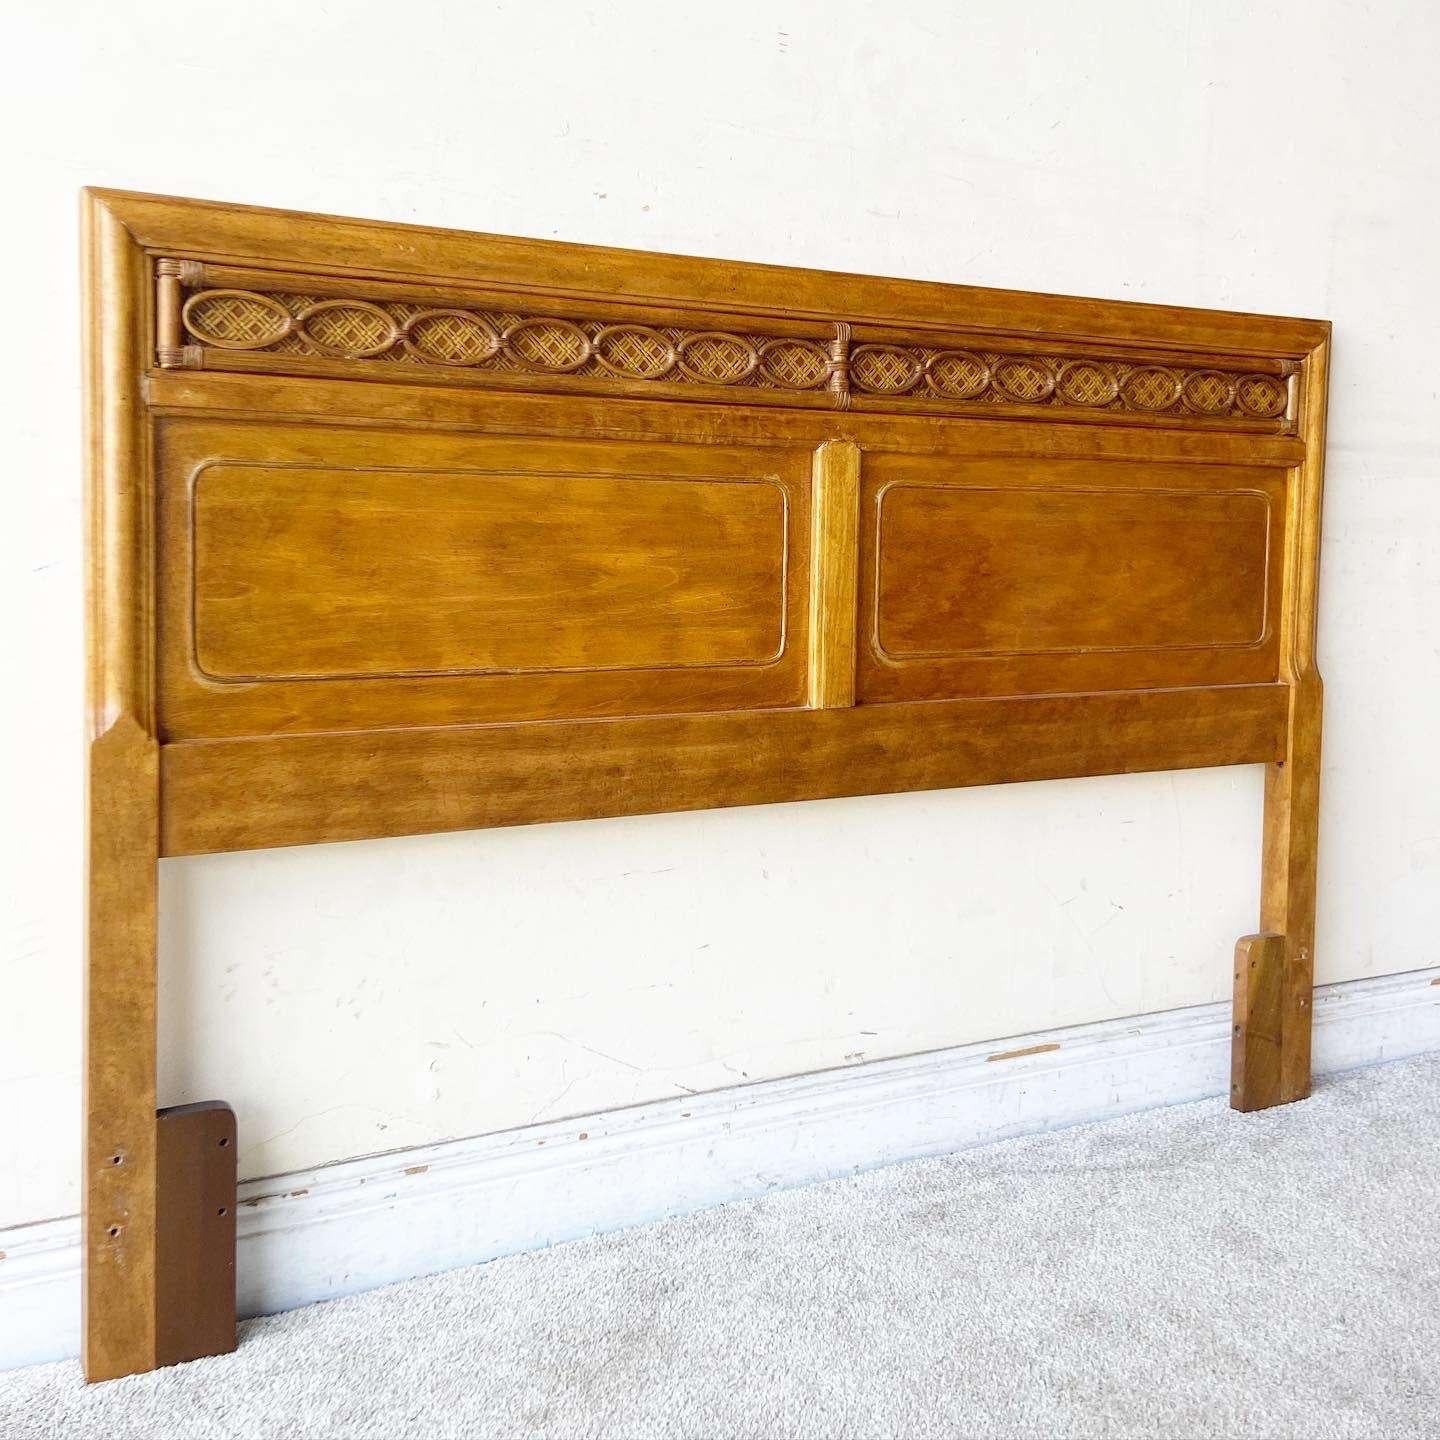 Exceptional vintage boho chic faux bamboo and rattan headboard by American of Martinsville. Features cane and reed accents.